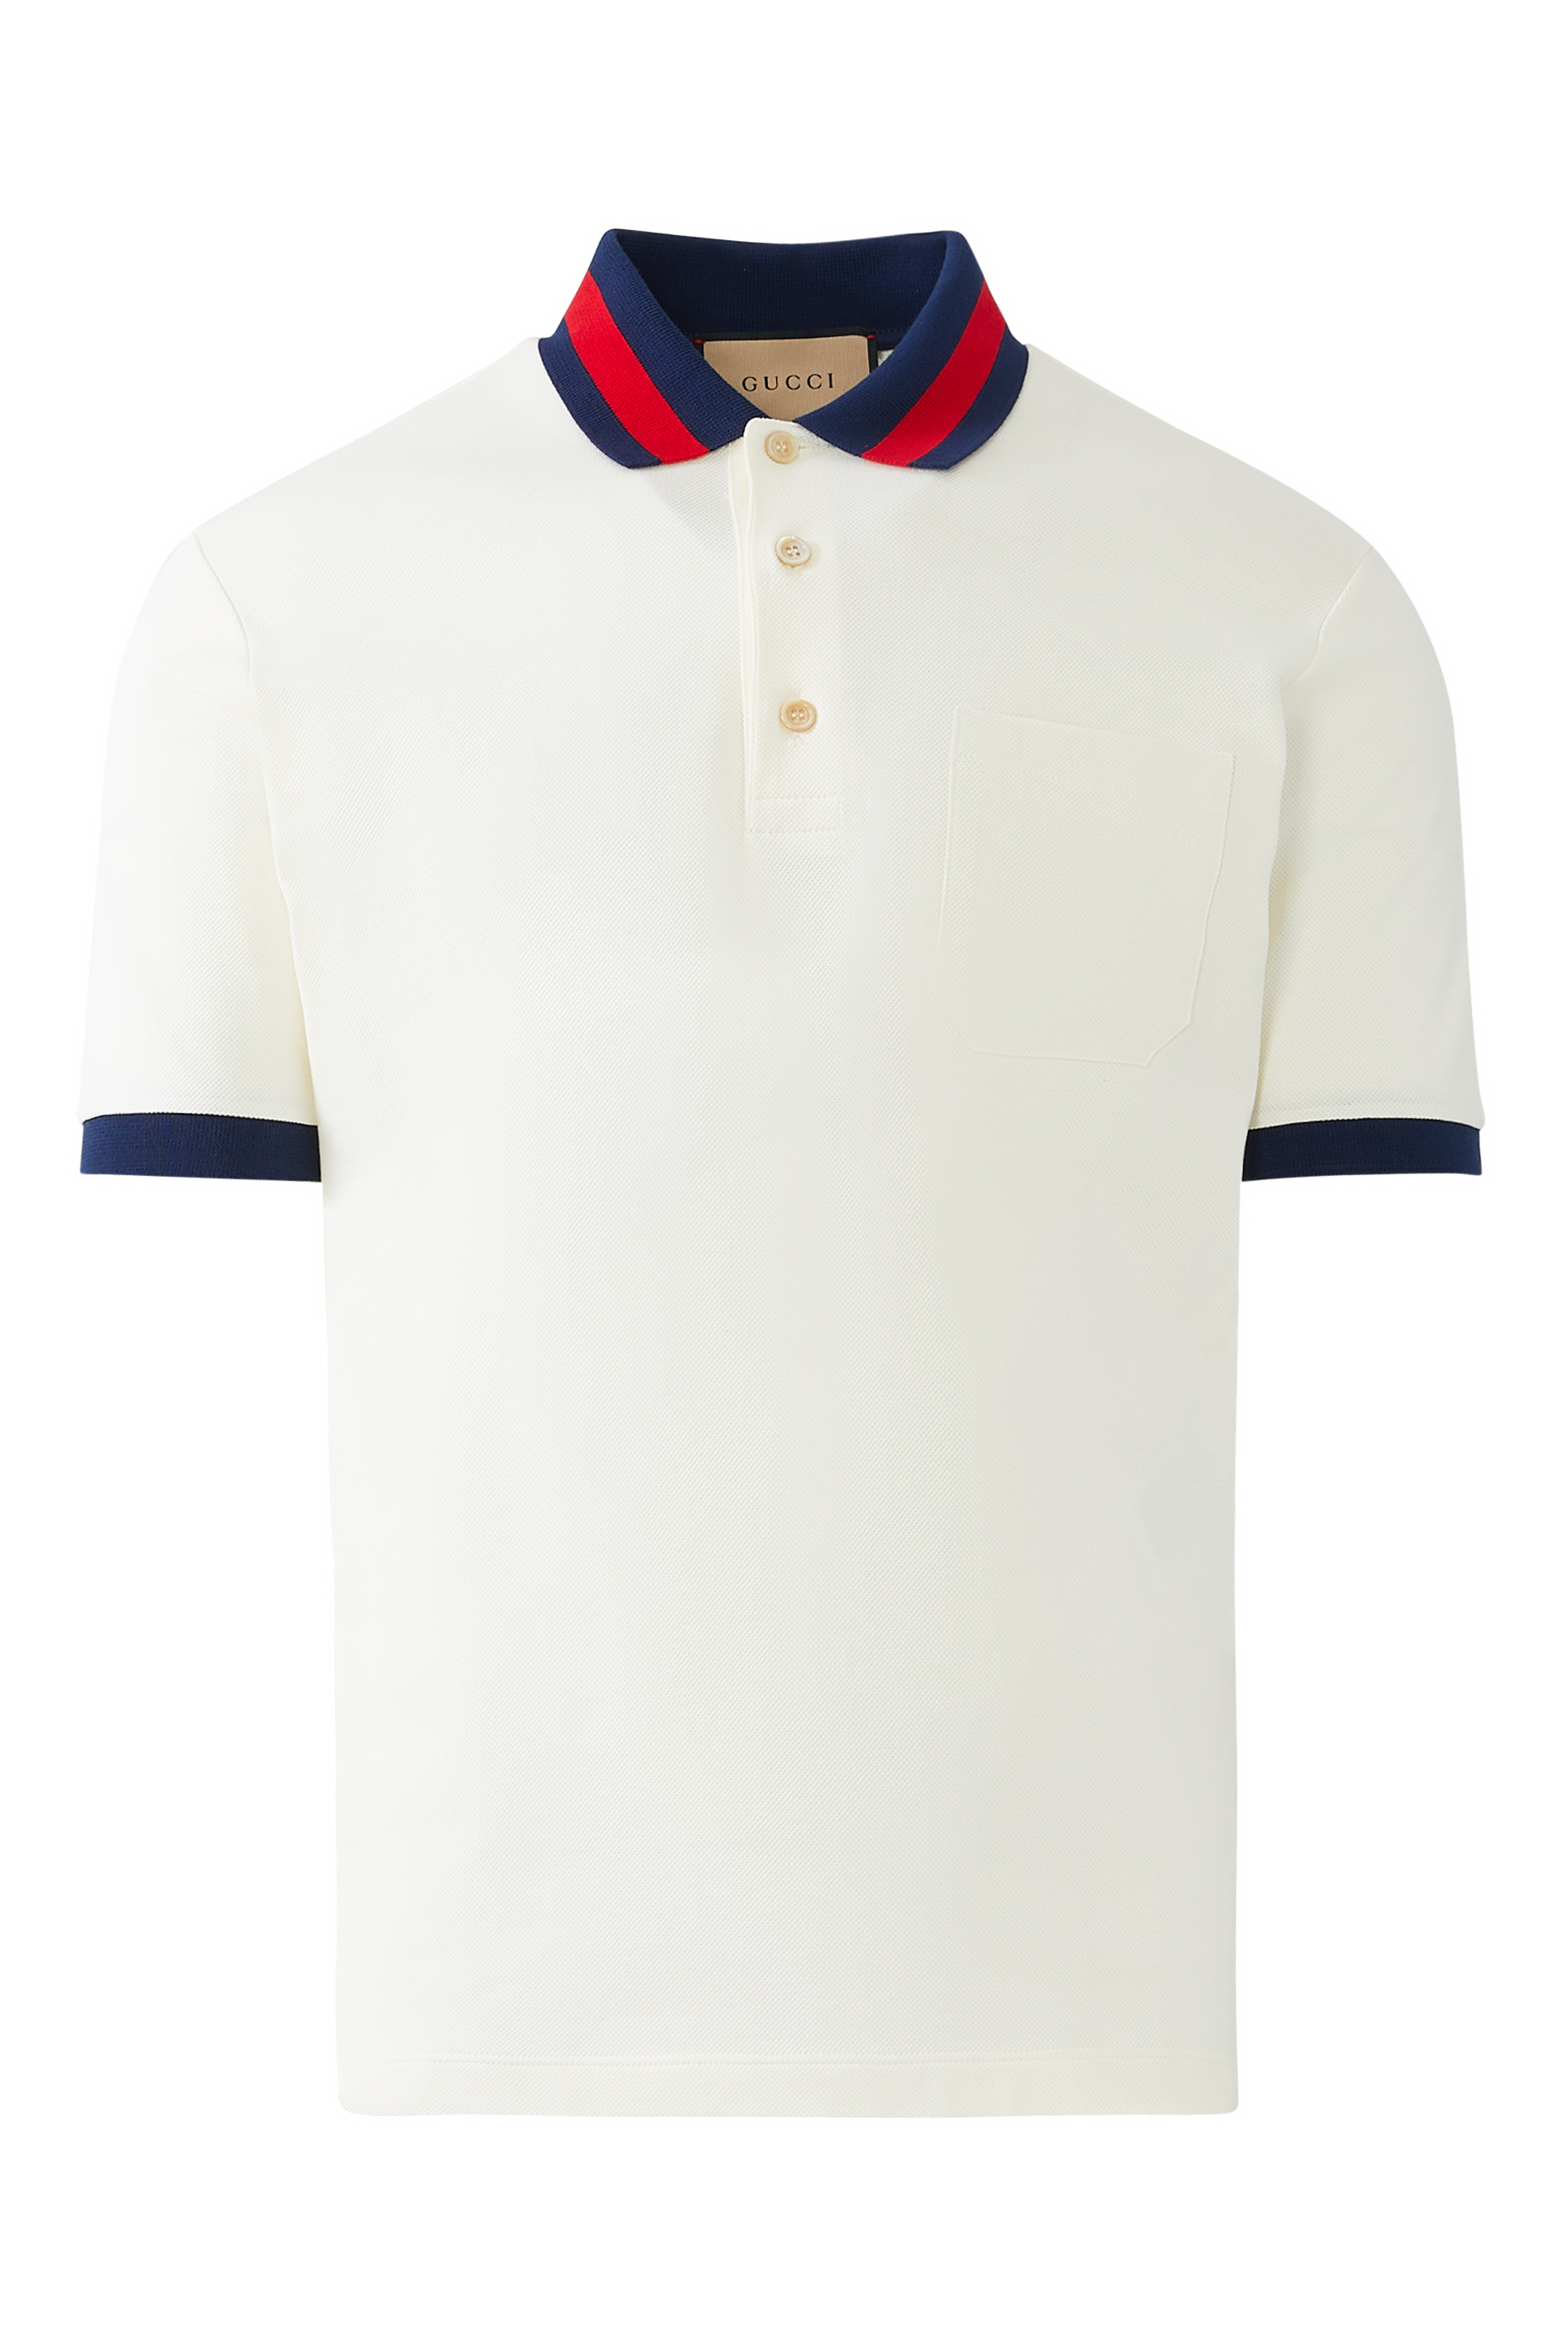 Buy Gucci Stretch Cotton Short Sleeve Polo Shirt for Mens ...